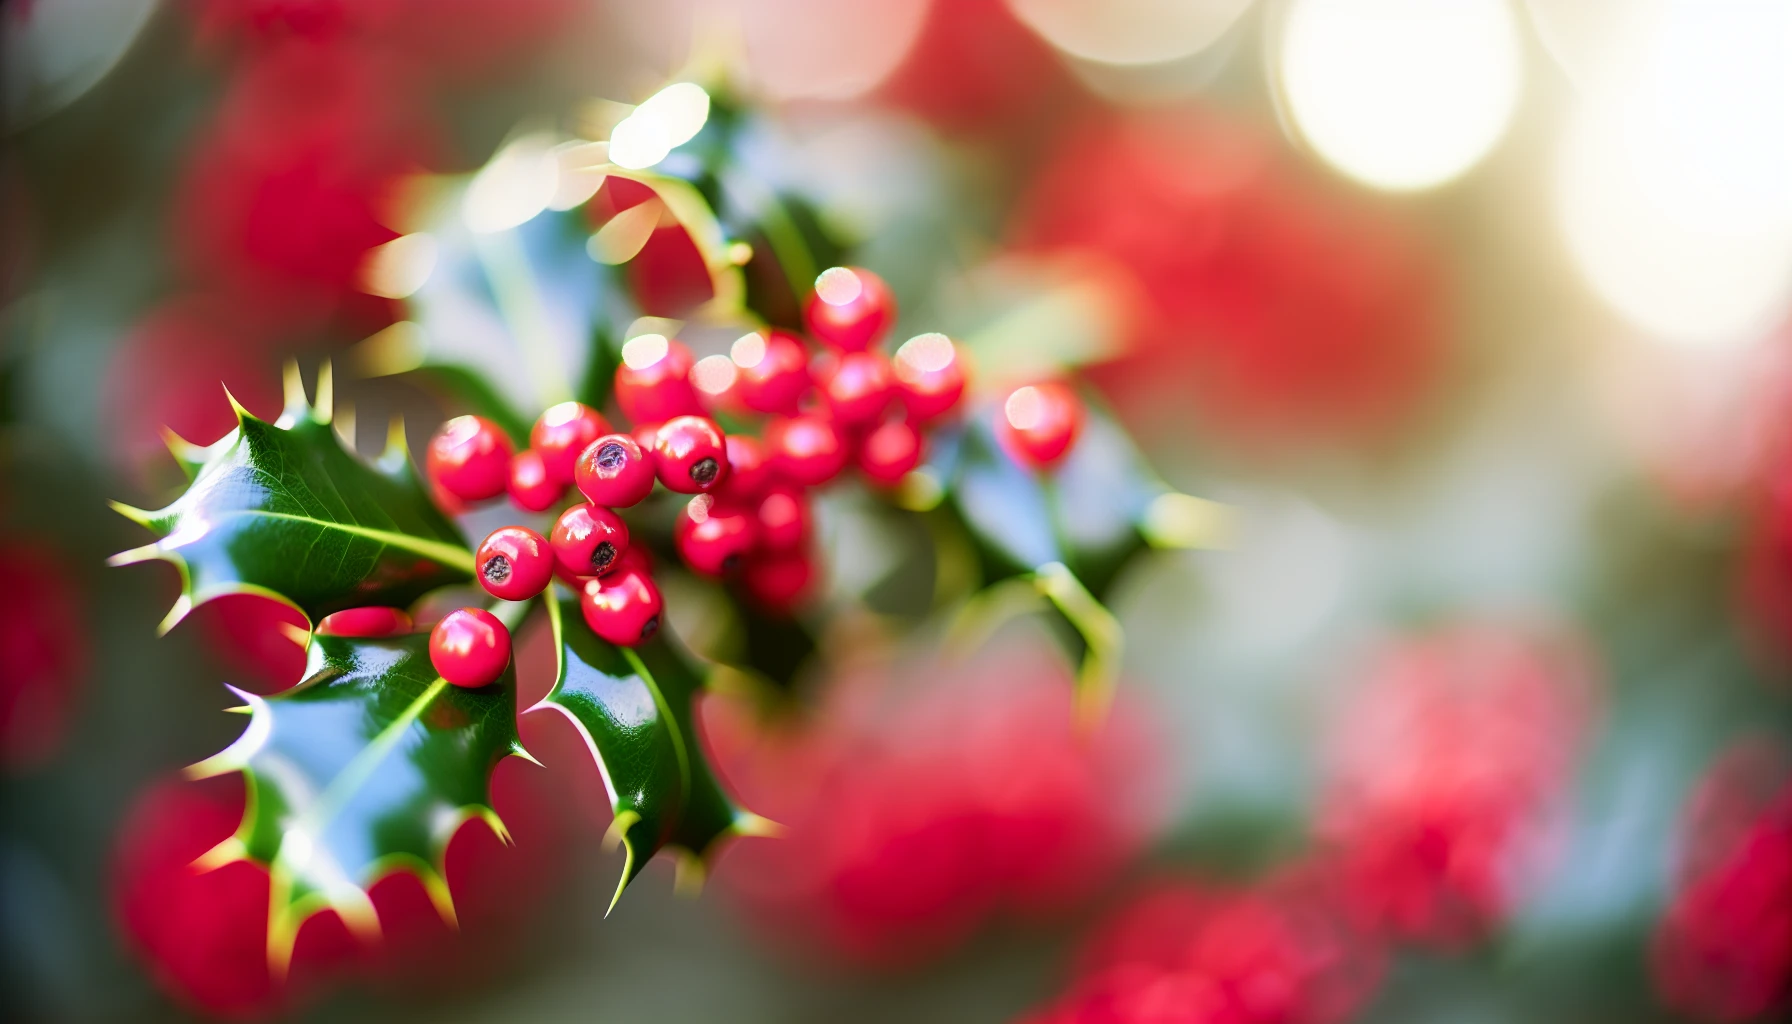 A close-up of holly with vibrant red berries